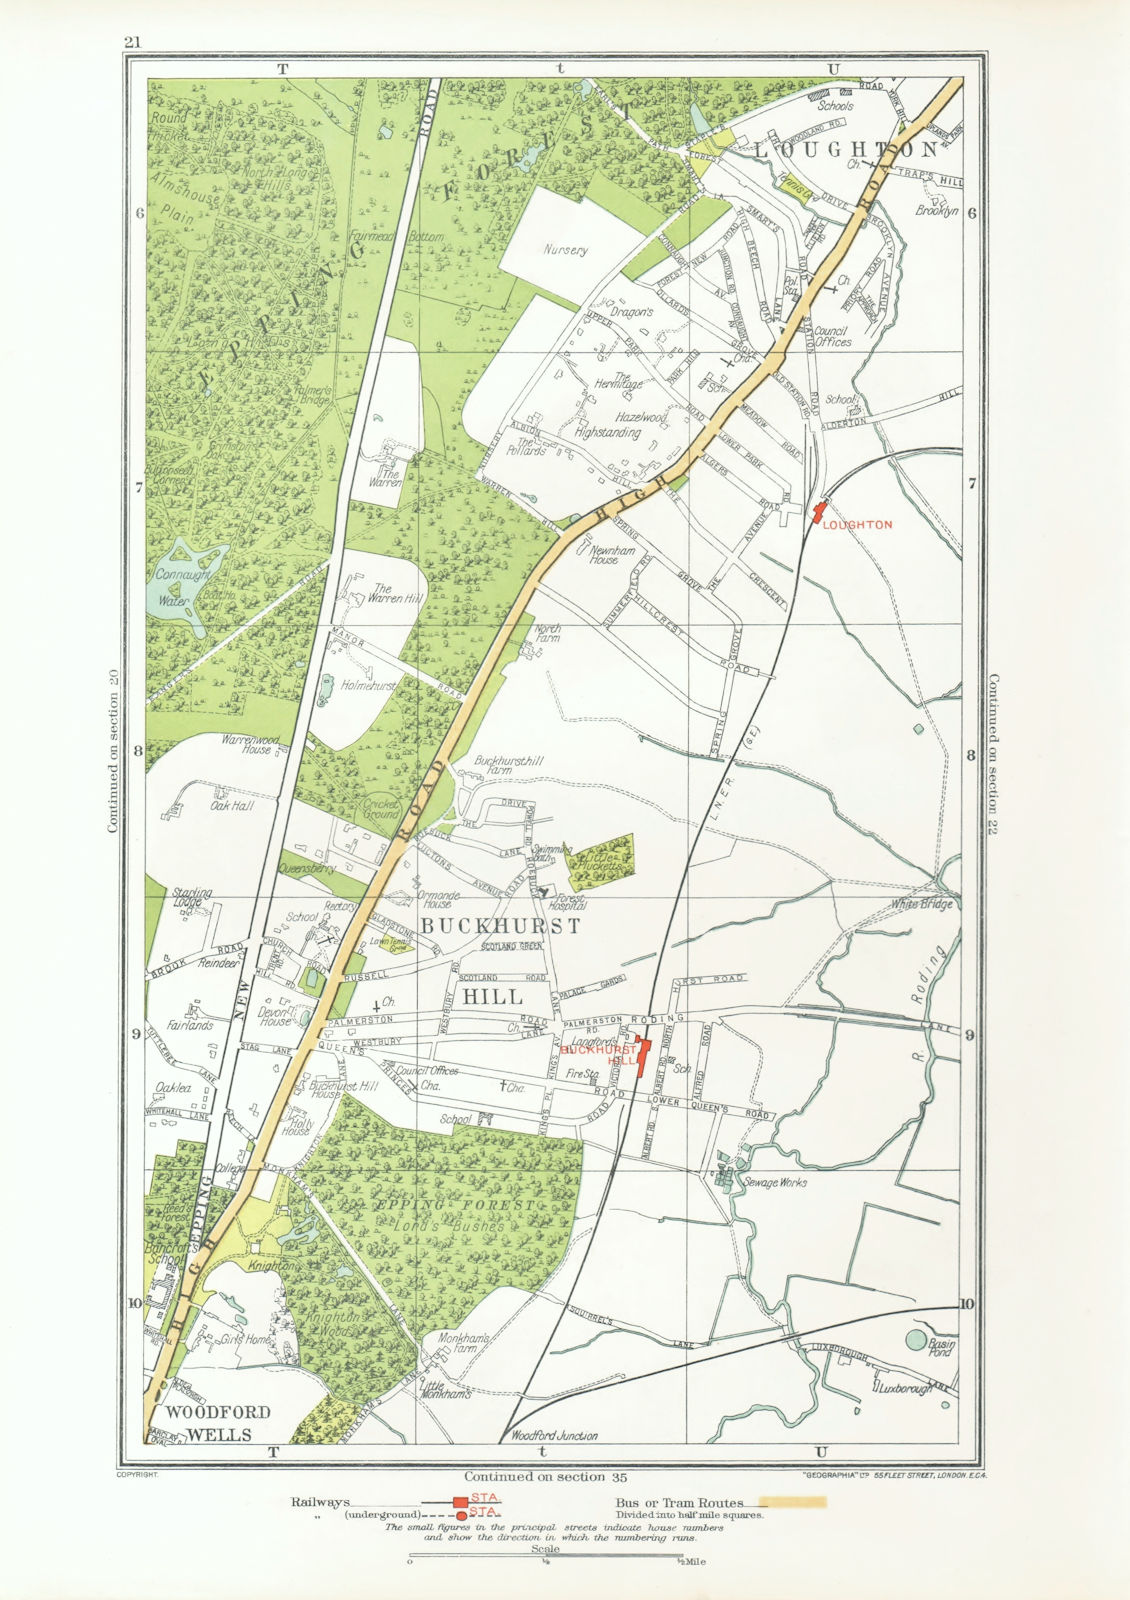 ESSEX. Buckhurst Hill Loughton Woodford Wells Roding Valley 1933 old map